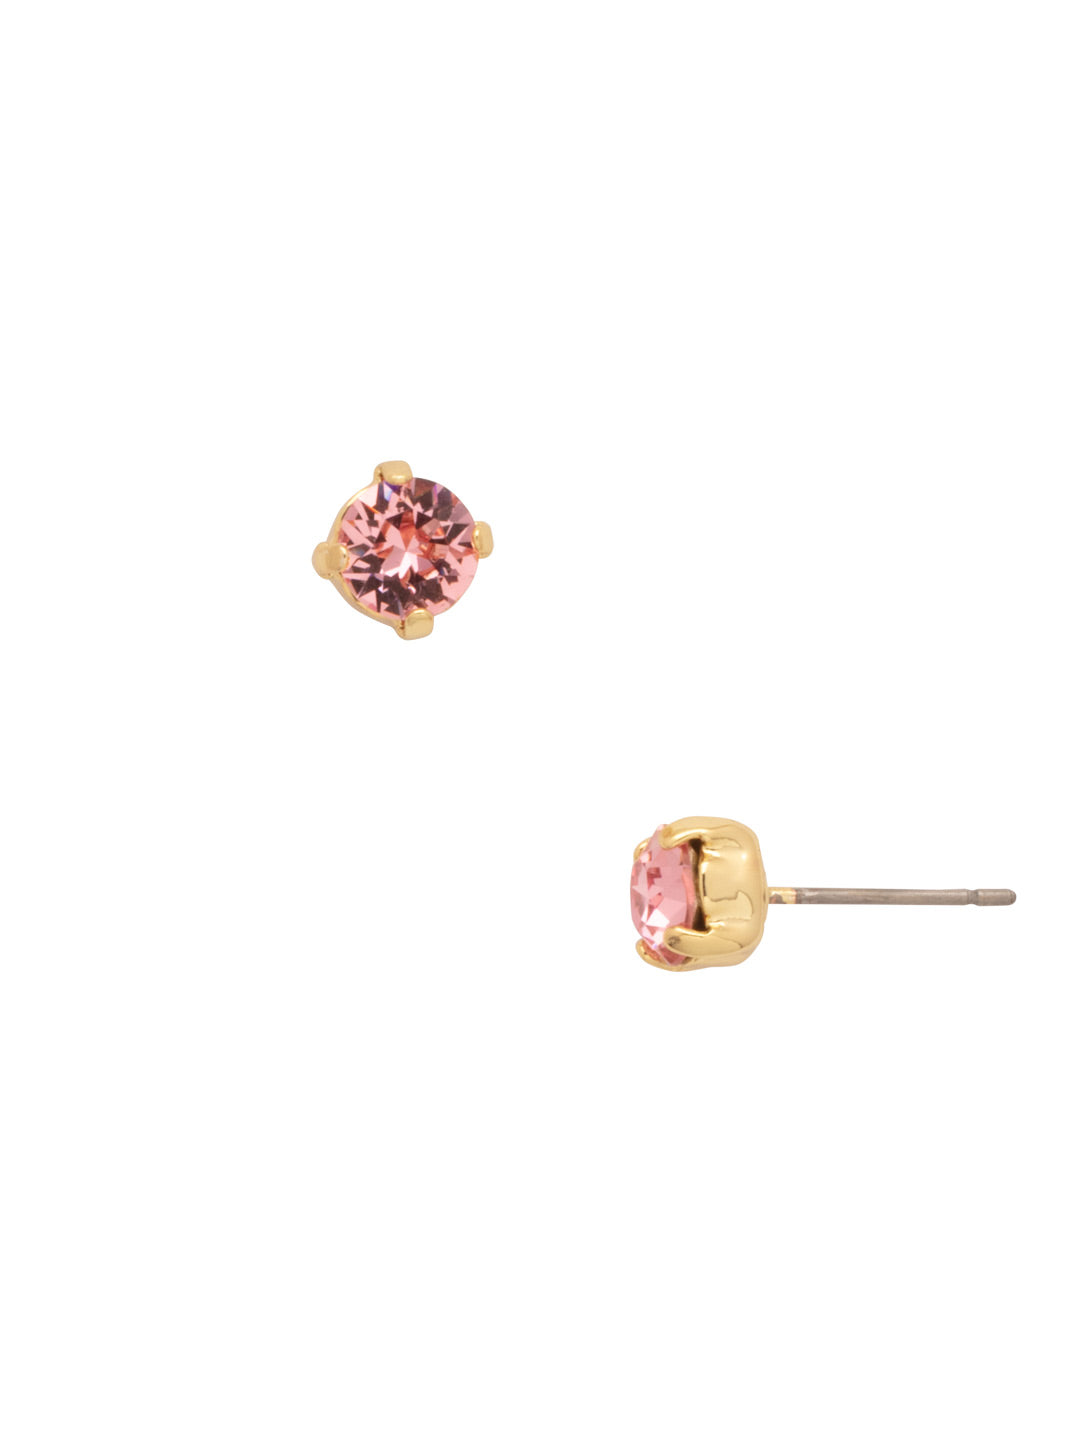 Jayda Stud Earrings - EDN32BGBFL - <p>The Jayda Stud Earrings are the perfect every day wardrobe staple. A round crystal nestles perfectly in a metal plated post with four prongs. </p><p>Need help picking a stud? <a href="https://www.sorrelli.com/blogs/sisterhood/round-stud-earrings-101-a-rundown-of-sizes-styles-and-sparkle">Check out our size guide!</a> From Sorrelli's Big Flirt collection in our Bright Gold-tone finish.</p>